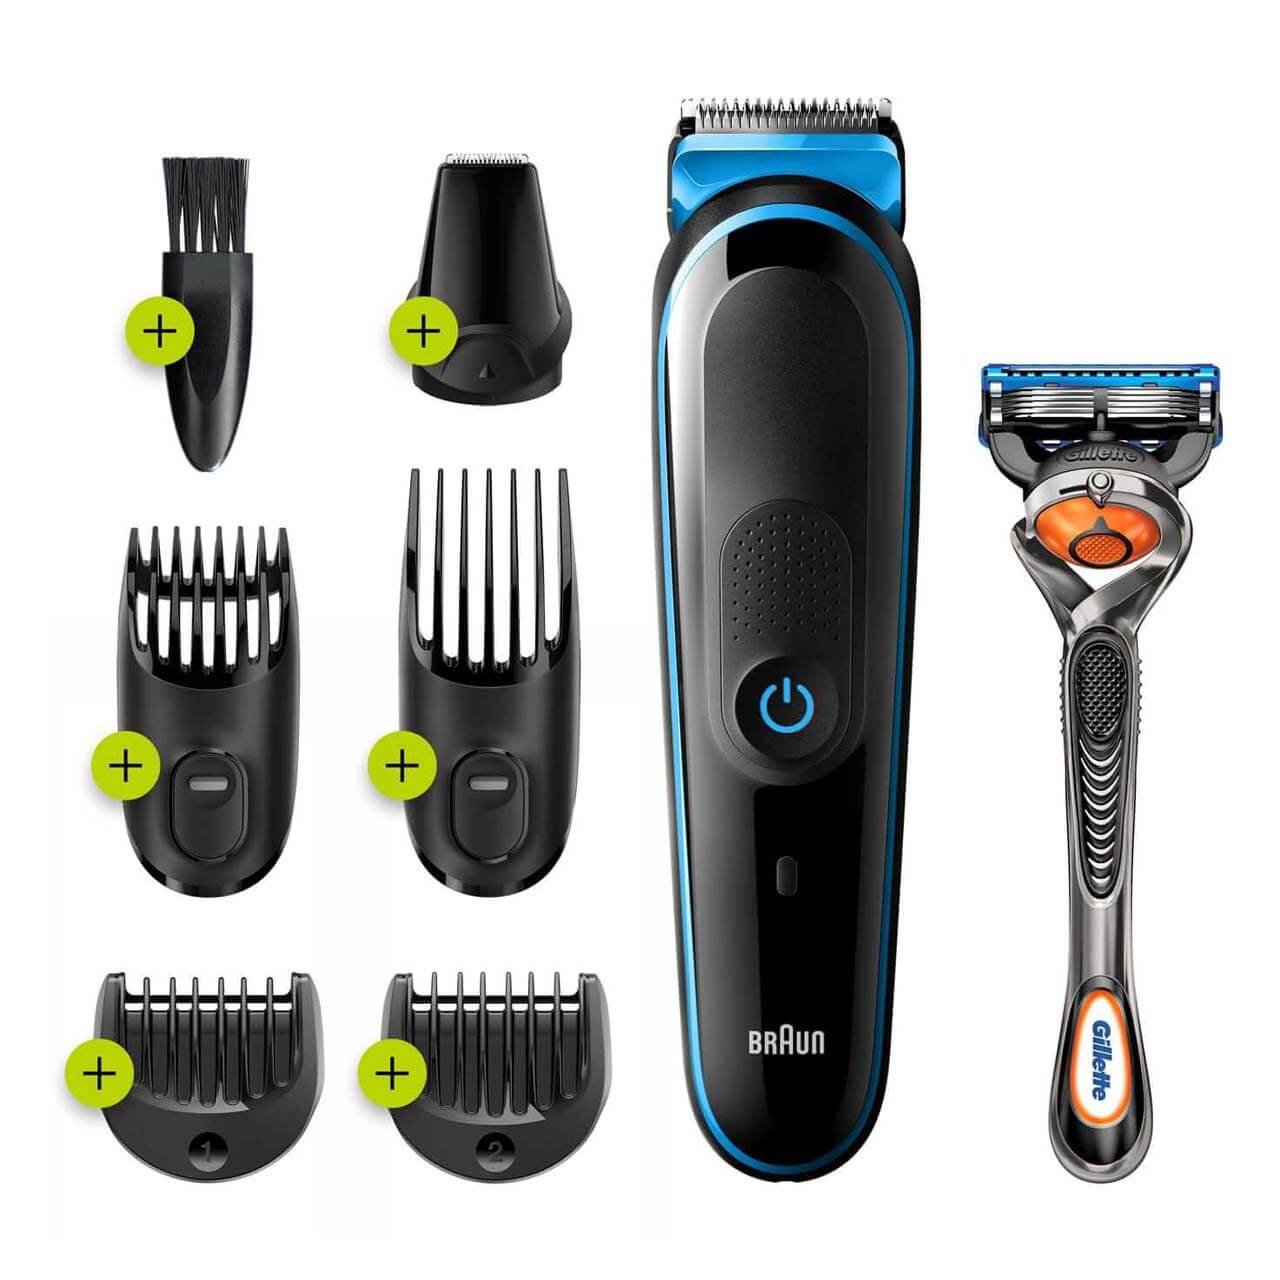 Braun Braun All-In-One Style Kit Series 3 3450, 5-in-1 Trimmer for